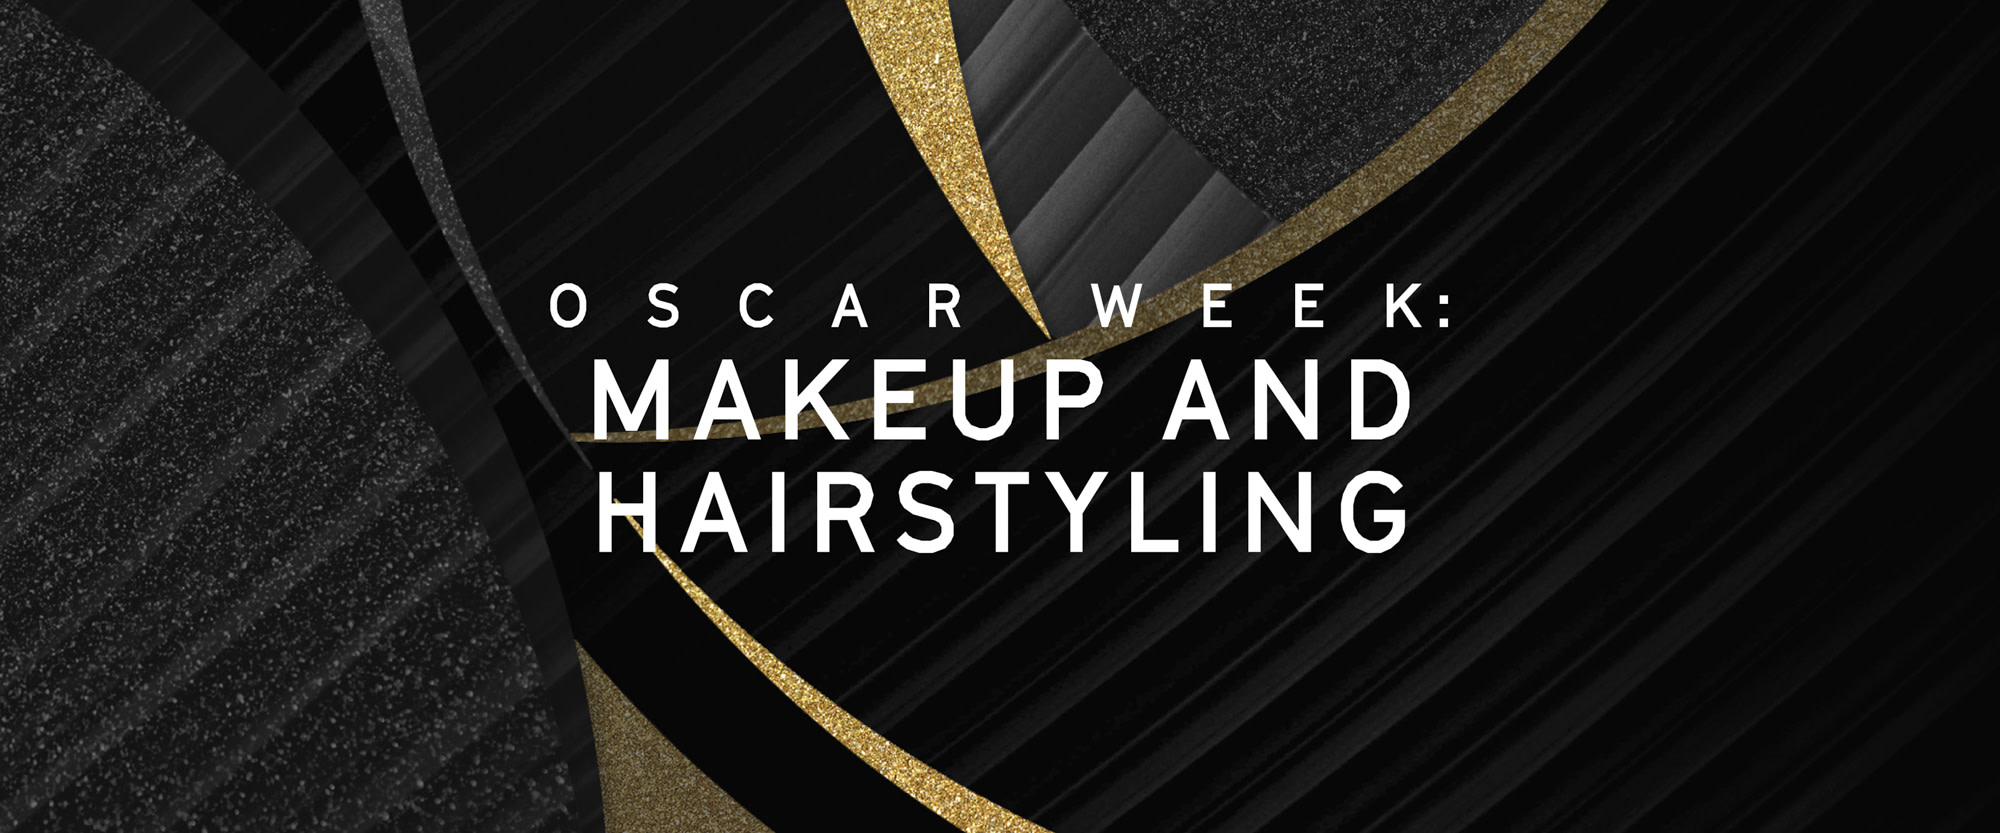 Oscar Week: Makeup and Hairstyling